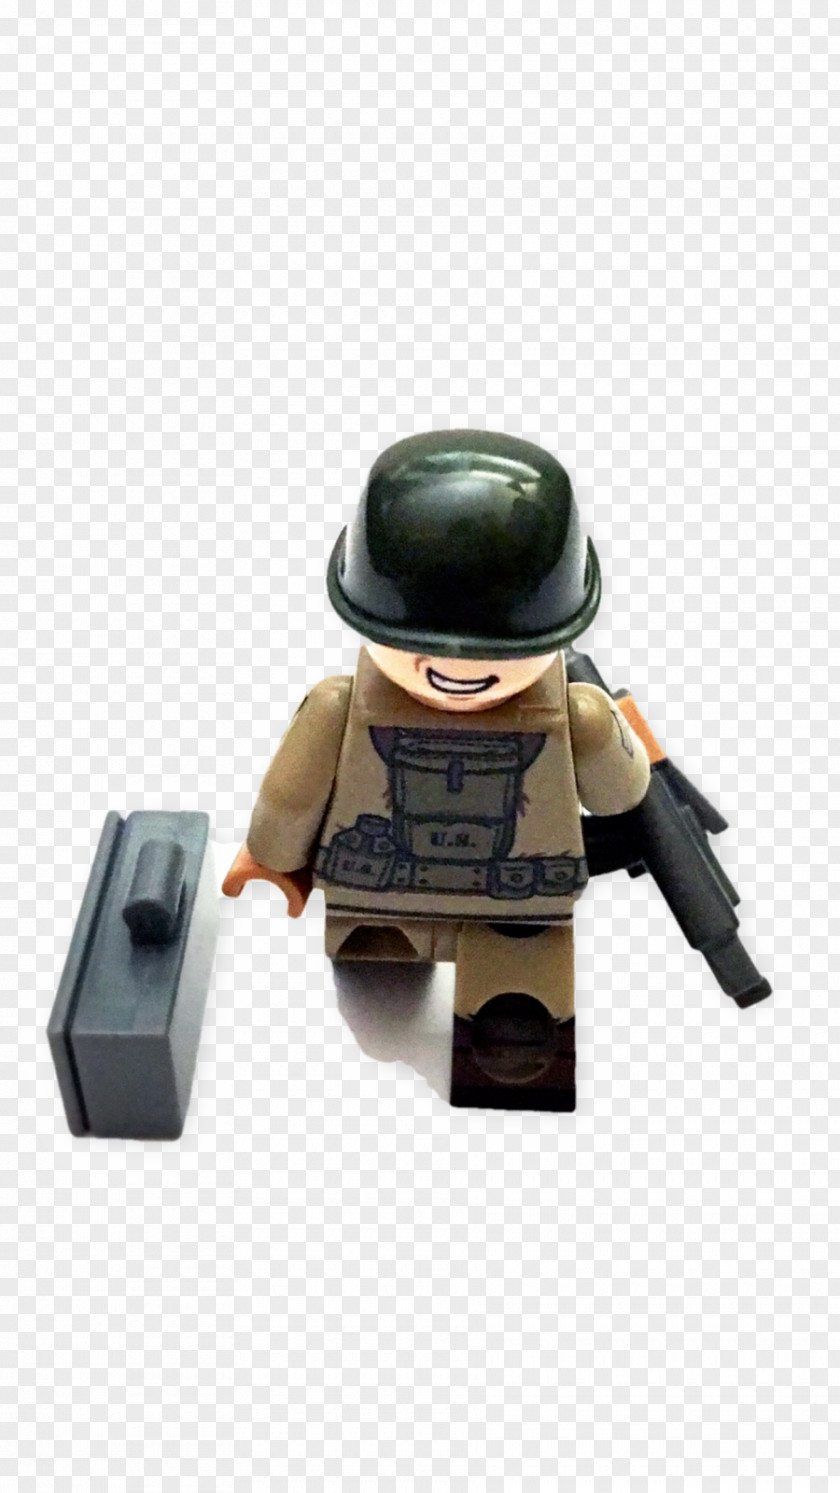 Lego Ww1 Snipers LEGO Store Helmet The Group PNG